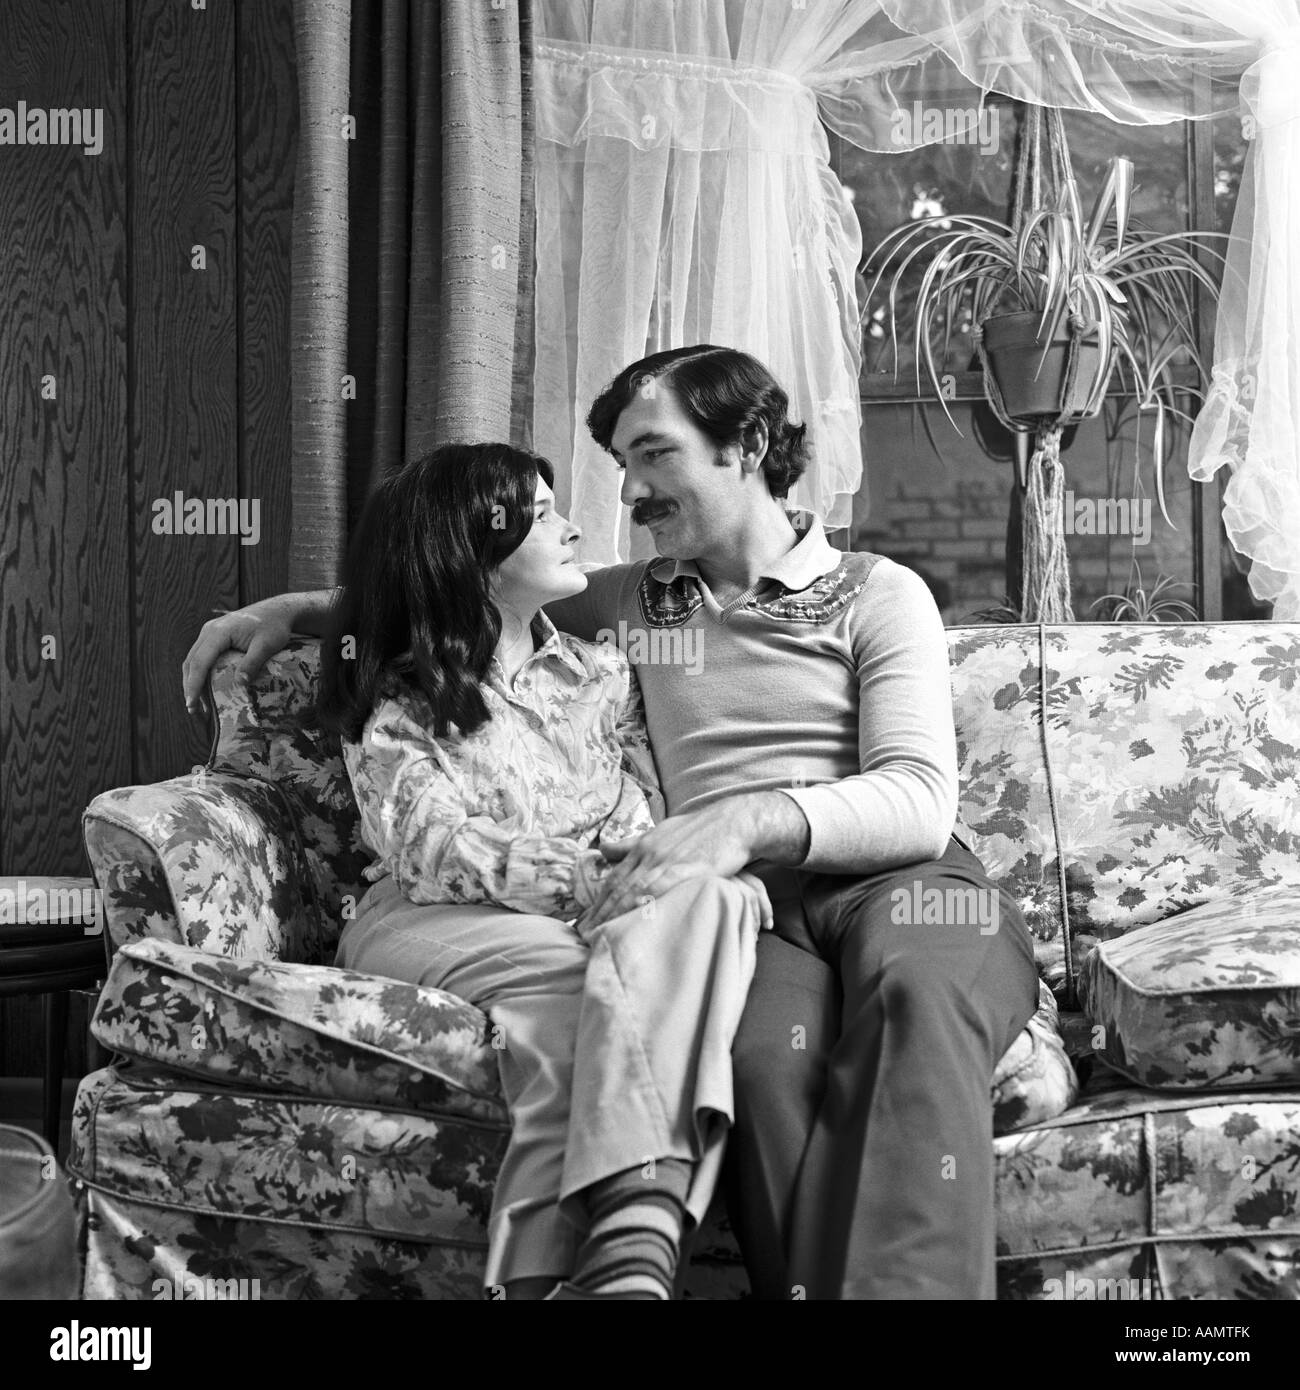 1970s COUPLE HUSBAND WIFE SITTING TOGETHER ON COUCH HUGGING HOLDING HANDS ROMANTIC Stock Photo